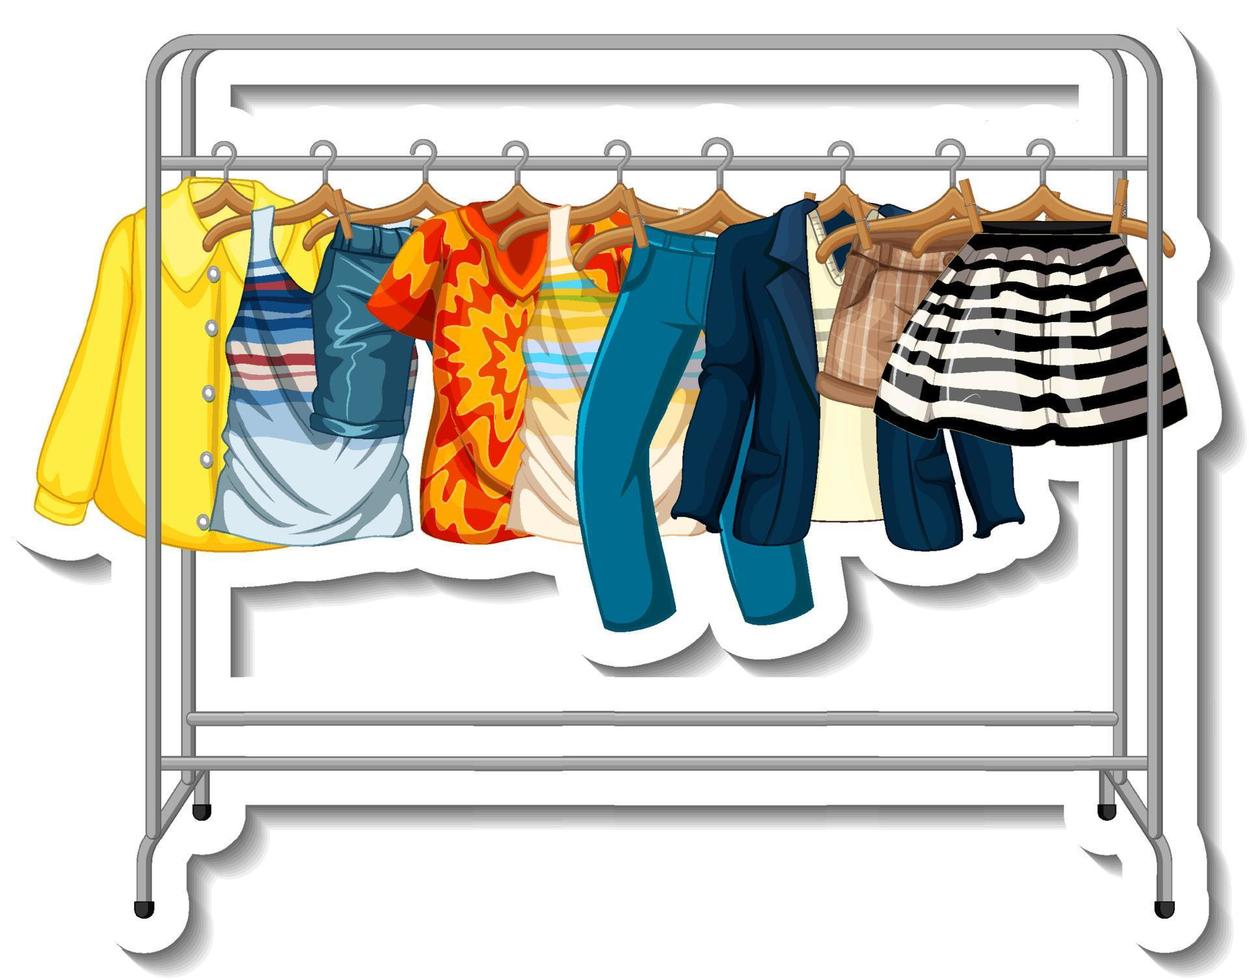 A sticker template of Clothes racks with many clothes on hangers on white background vector